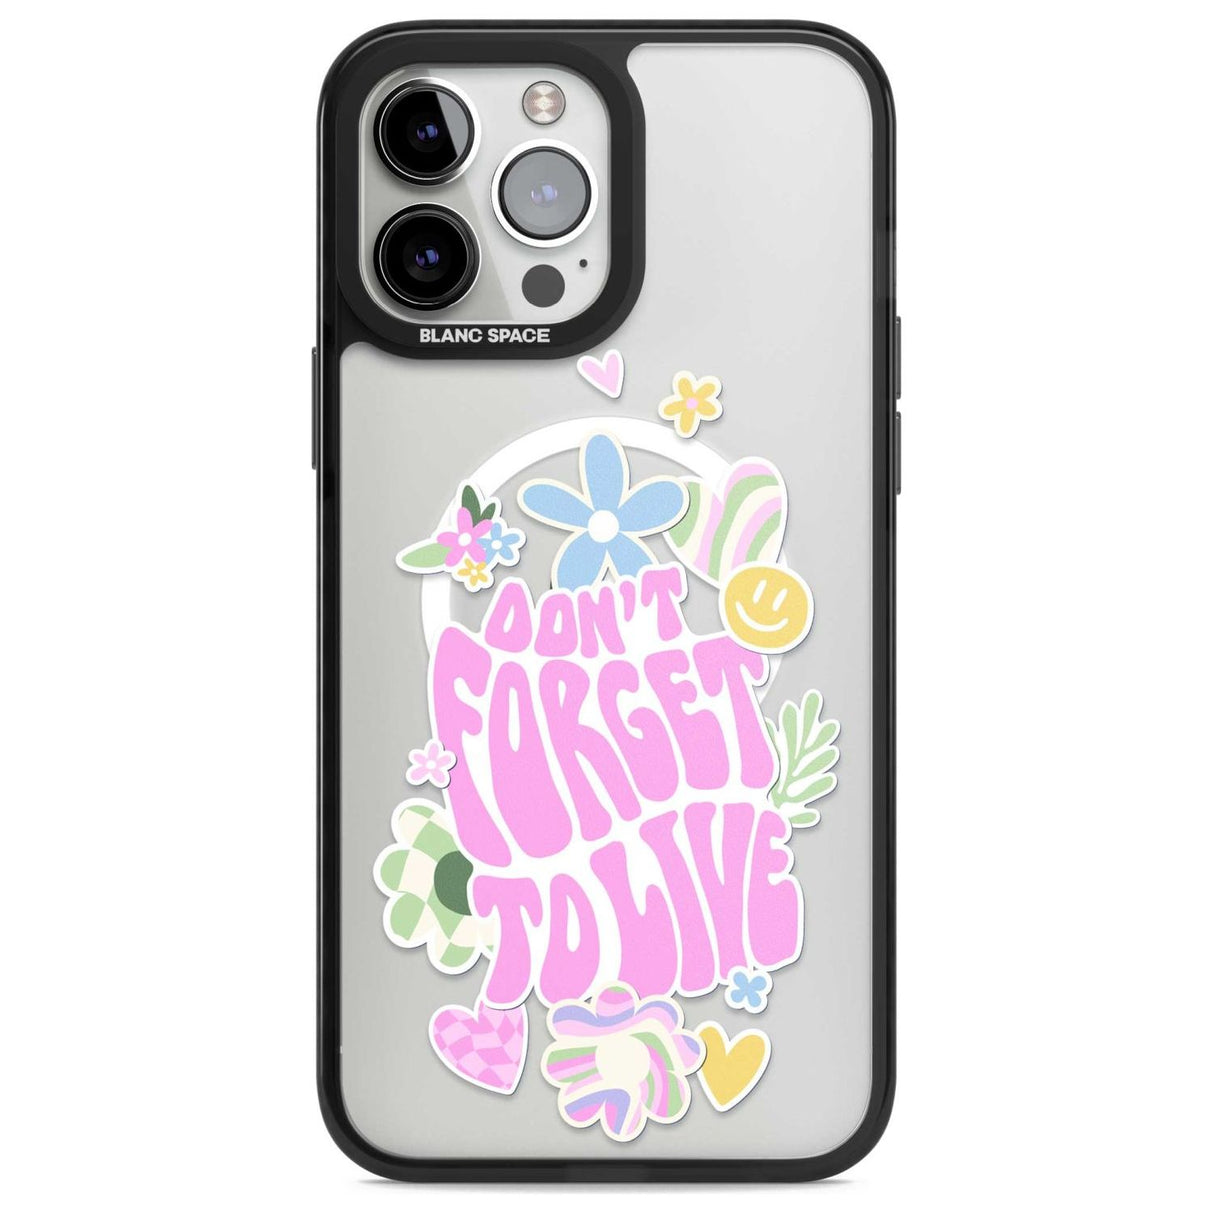 Don't Forget To Live Phone Case iPhone 13 Pro Max / Magsafe Black Impact Case Blanc Space